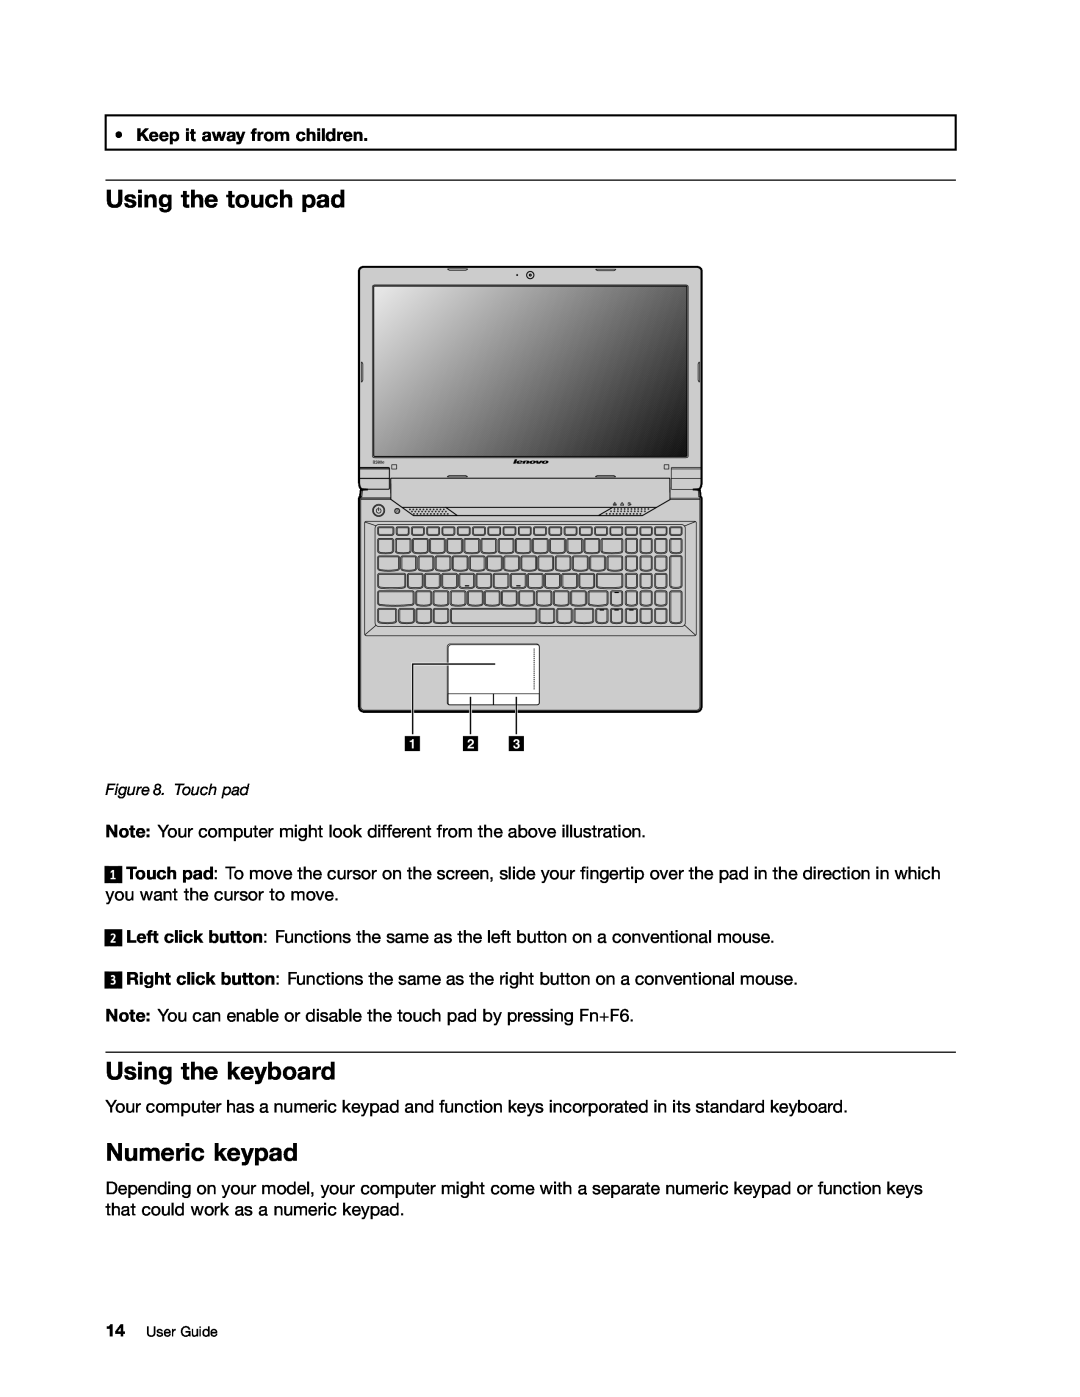 Lenovo 59366616 manual Using the touch pad, Using the keyboard, Numeric keypad, Keep it away from children 